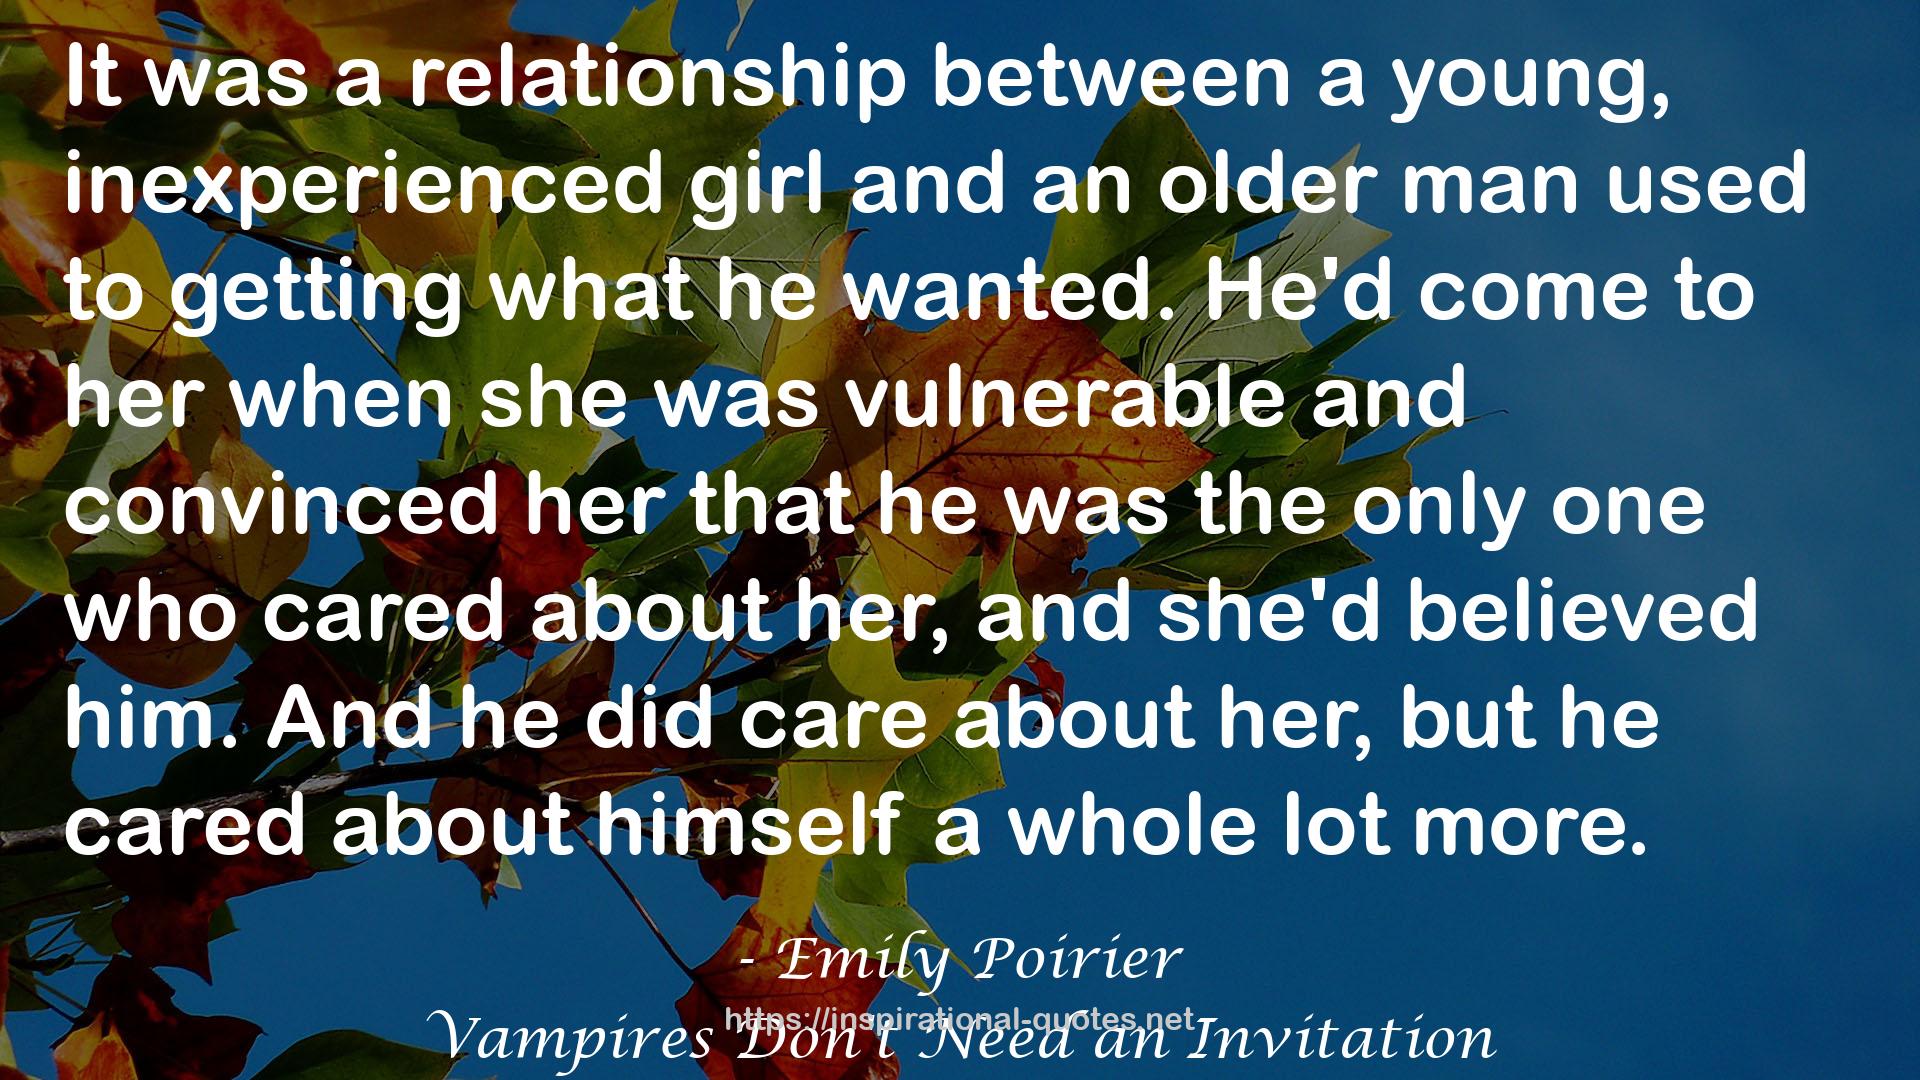 Vampires Don't Need an Invitation QUOTES